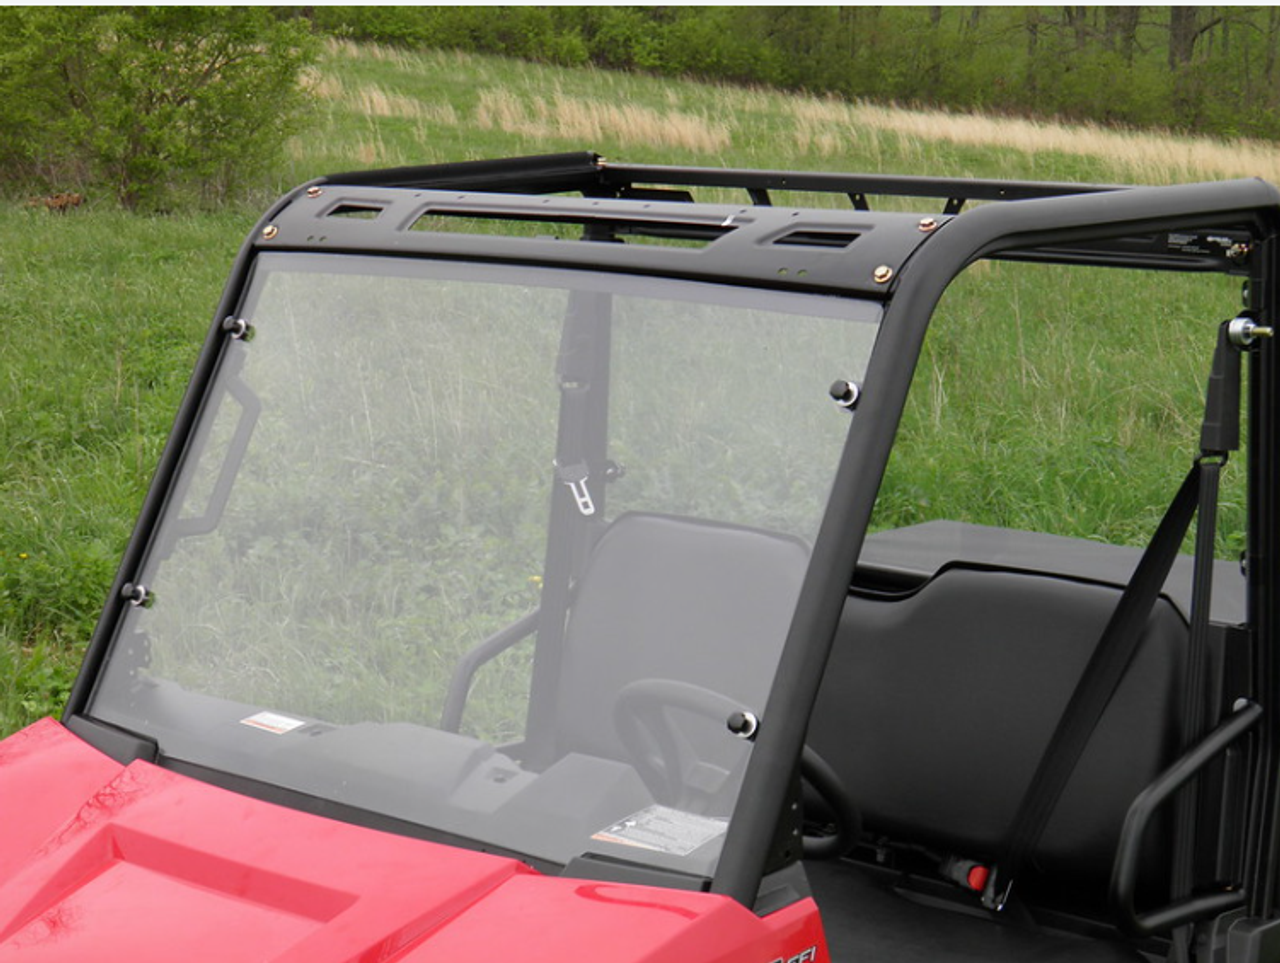 3 Star side x side Polaris Ranger Crew 570-4 windshield front angle view